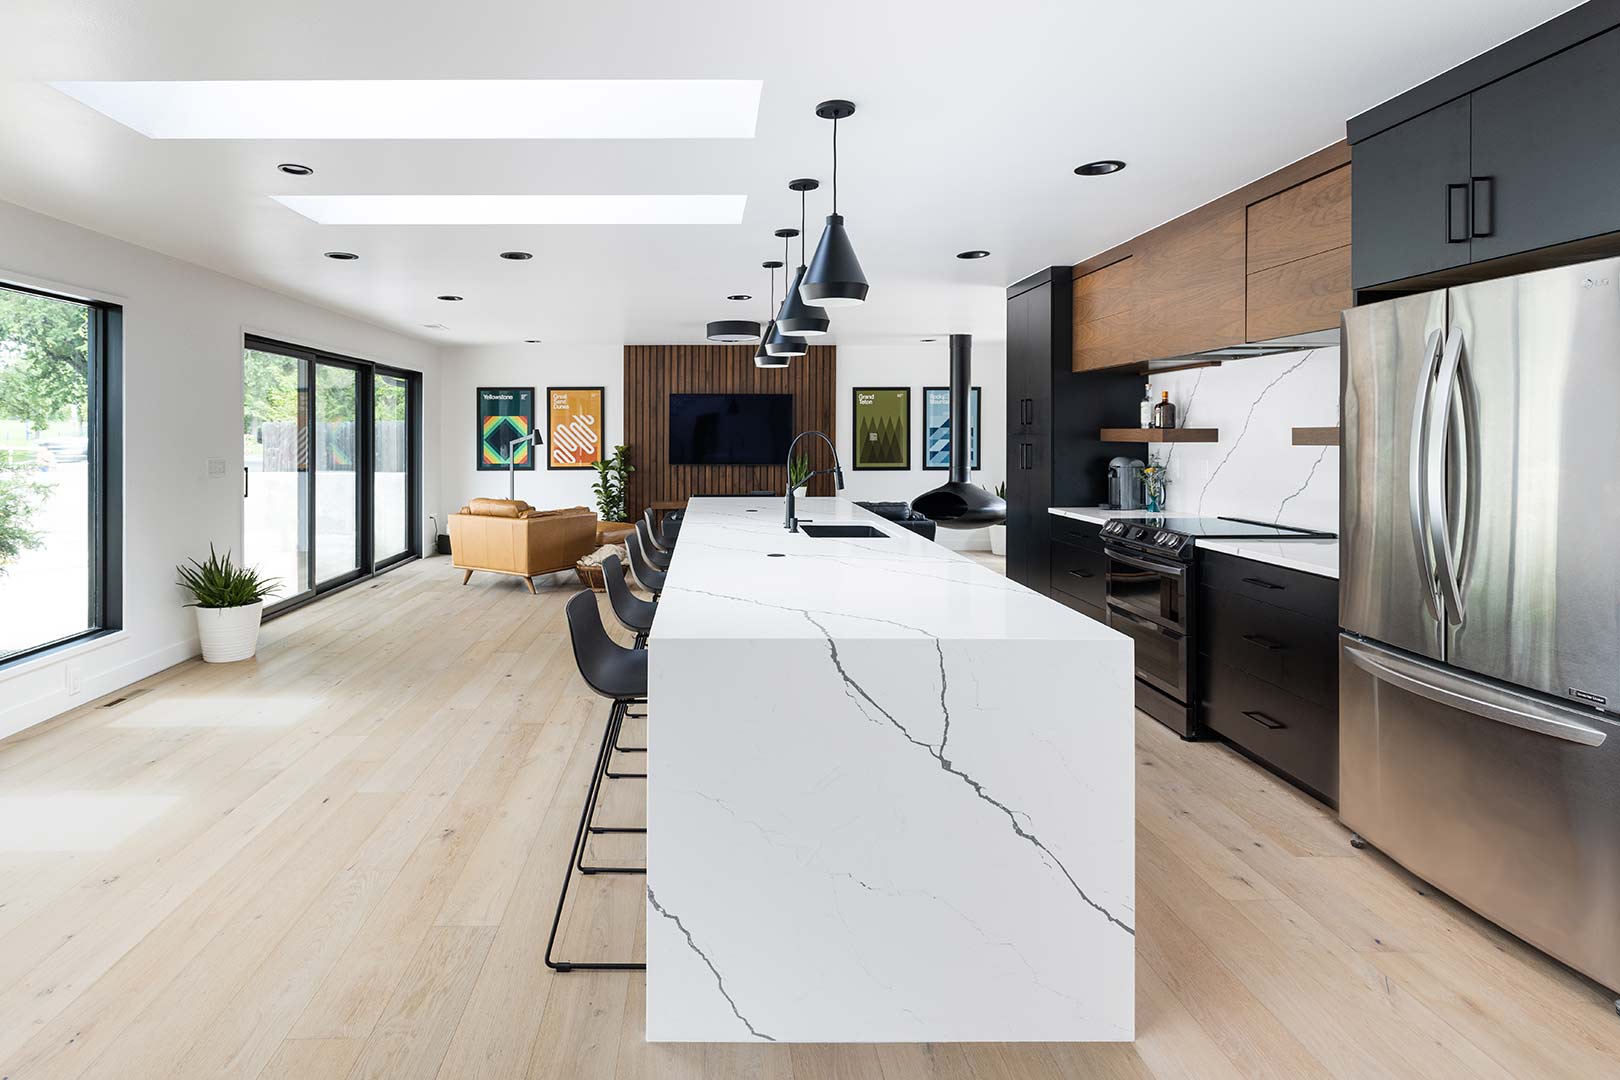 Detailed image featuring the quartz countertop waterfall edge of the kitchen island.